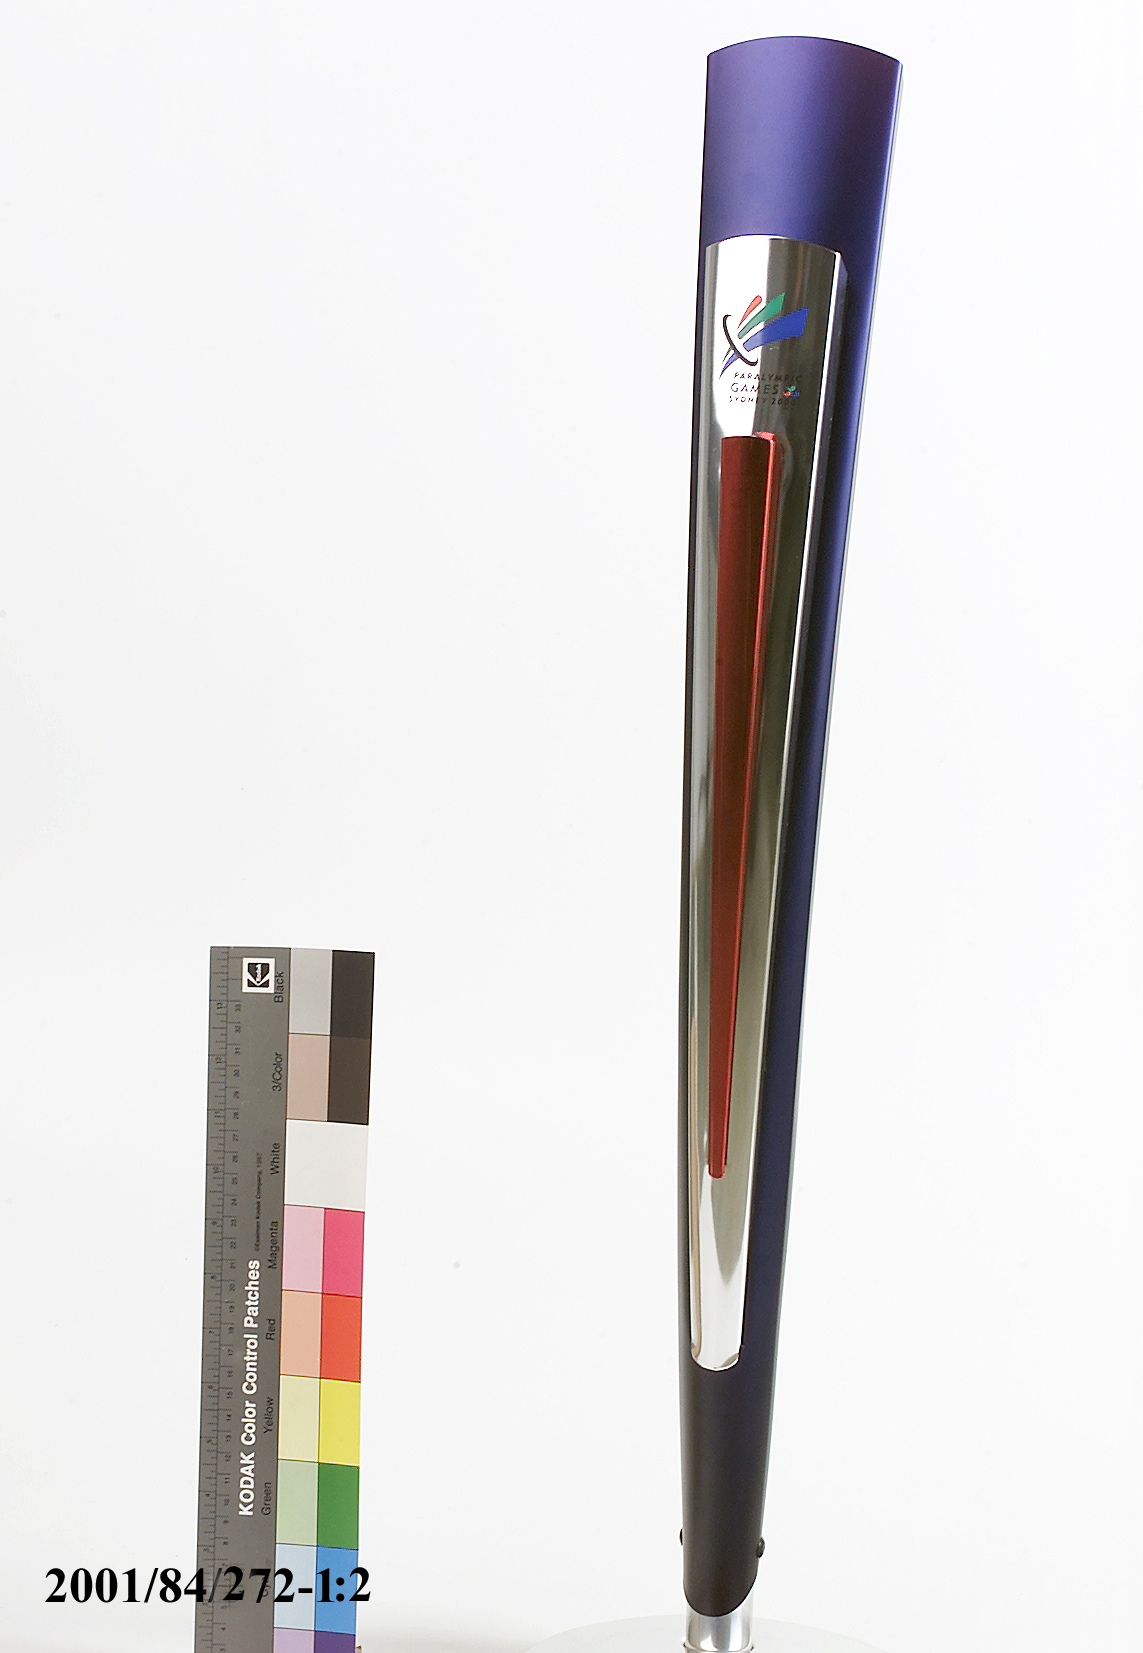 Sydney 2000 Paralympic Games torch with packaging